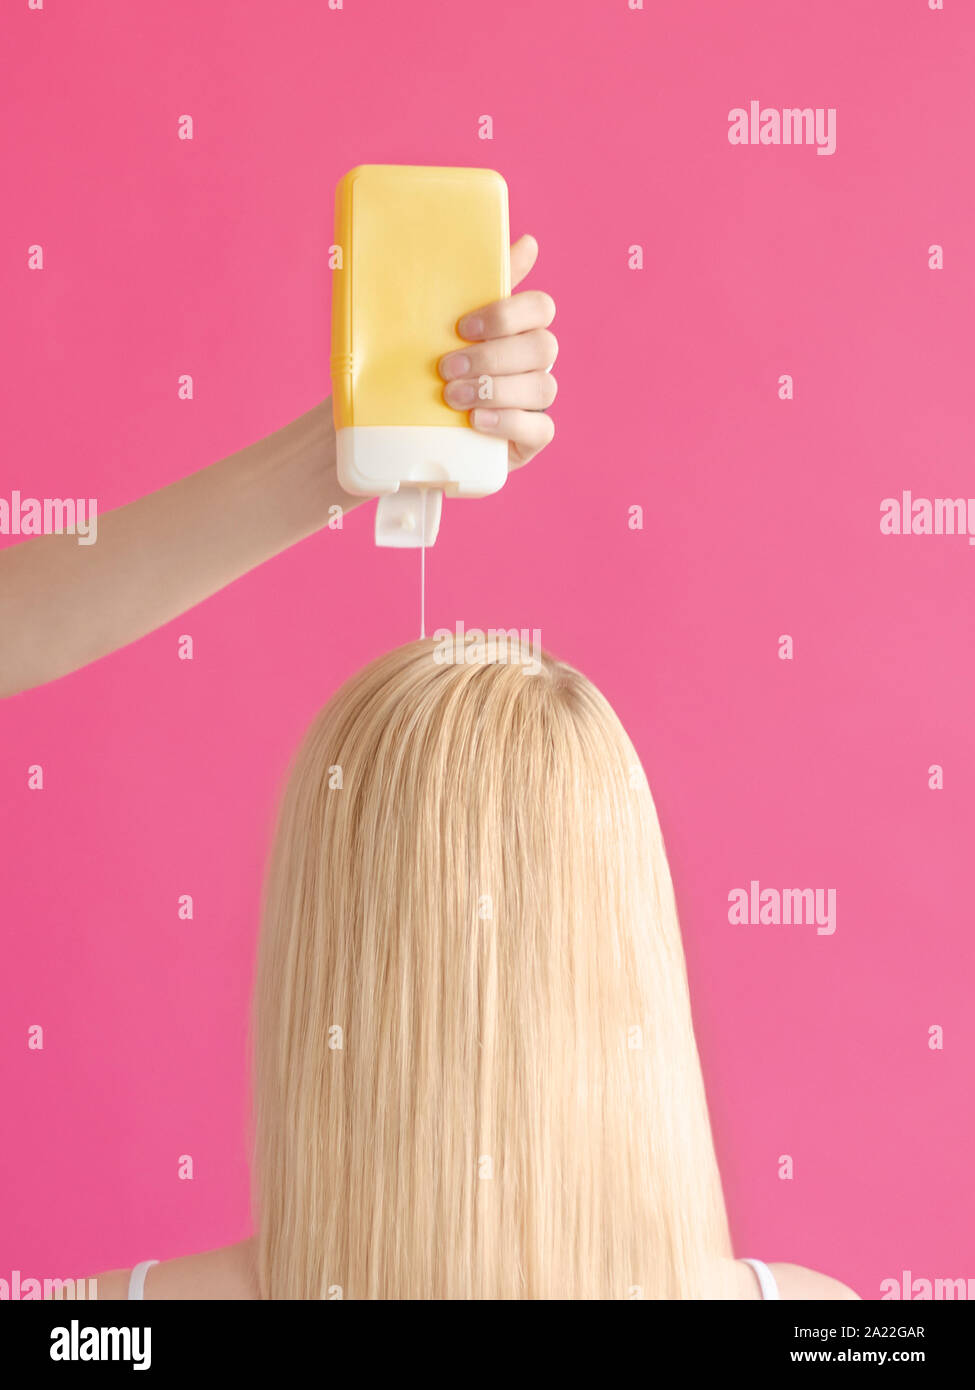 Washing hair  Woman's hand is pouring shampoo from yellow bottle on the head of a long-haired blonde girl against pink background Stock Photo